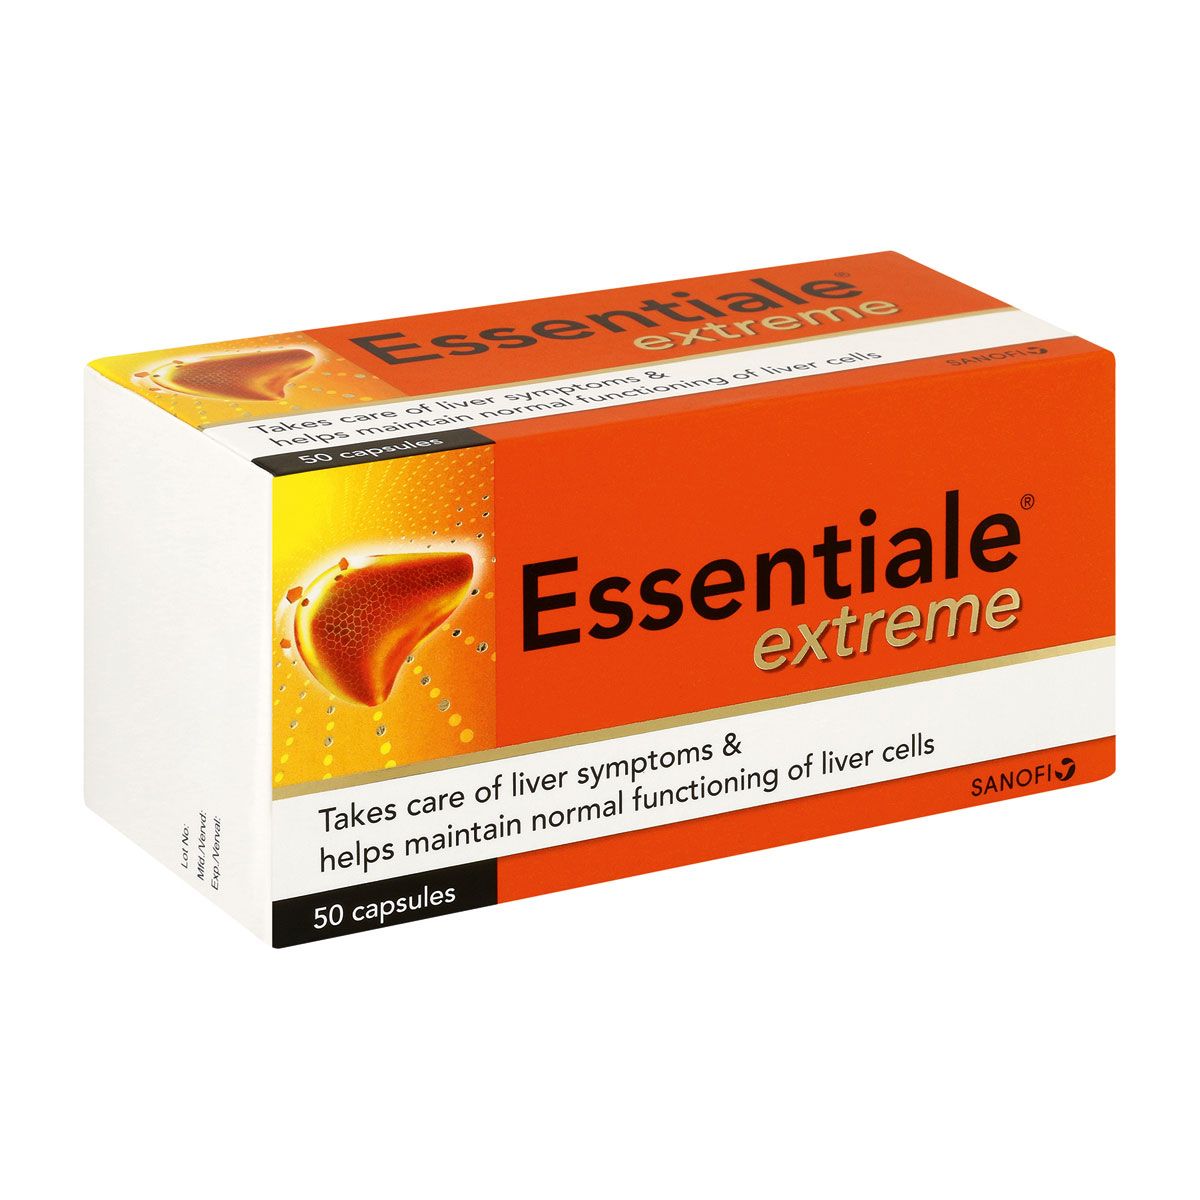 Essentiale Extreme Capsules 50's – Pharmacy at Spar Midrand